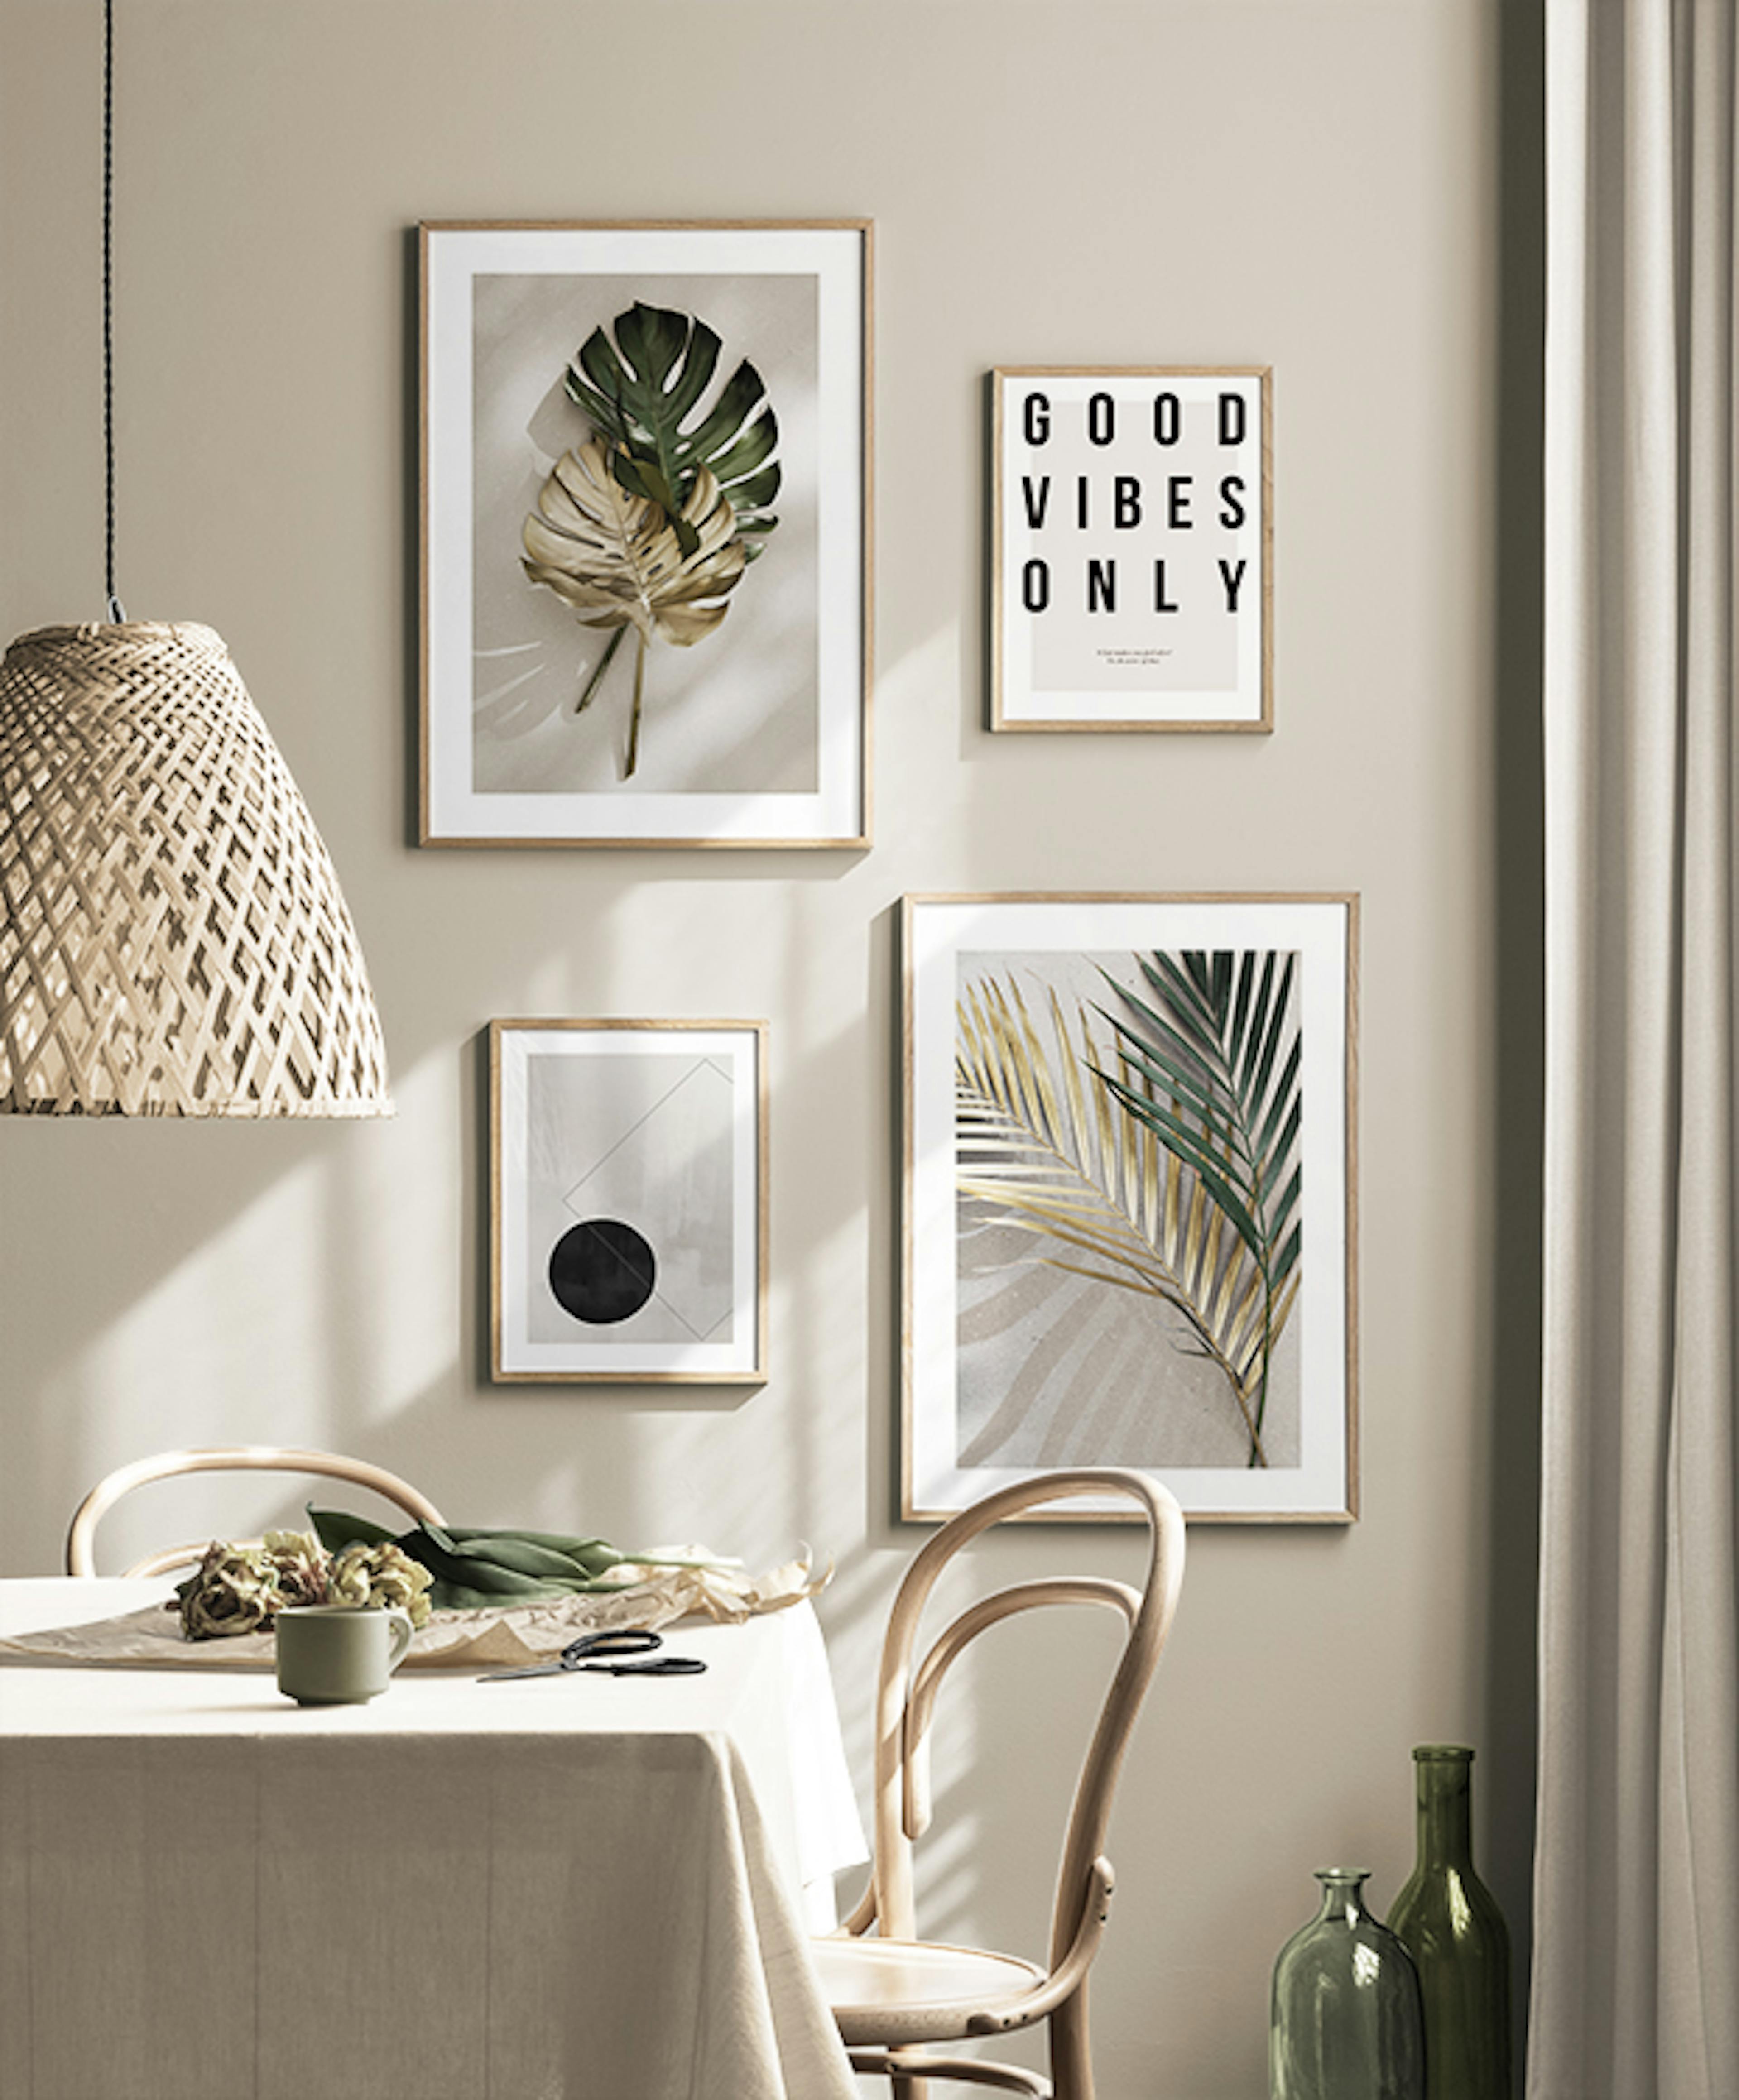 Golden Vibes gallery wall